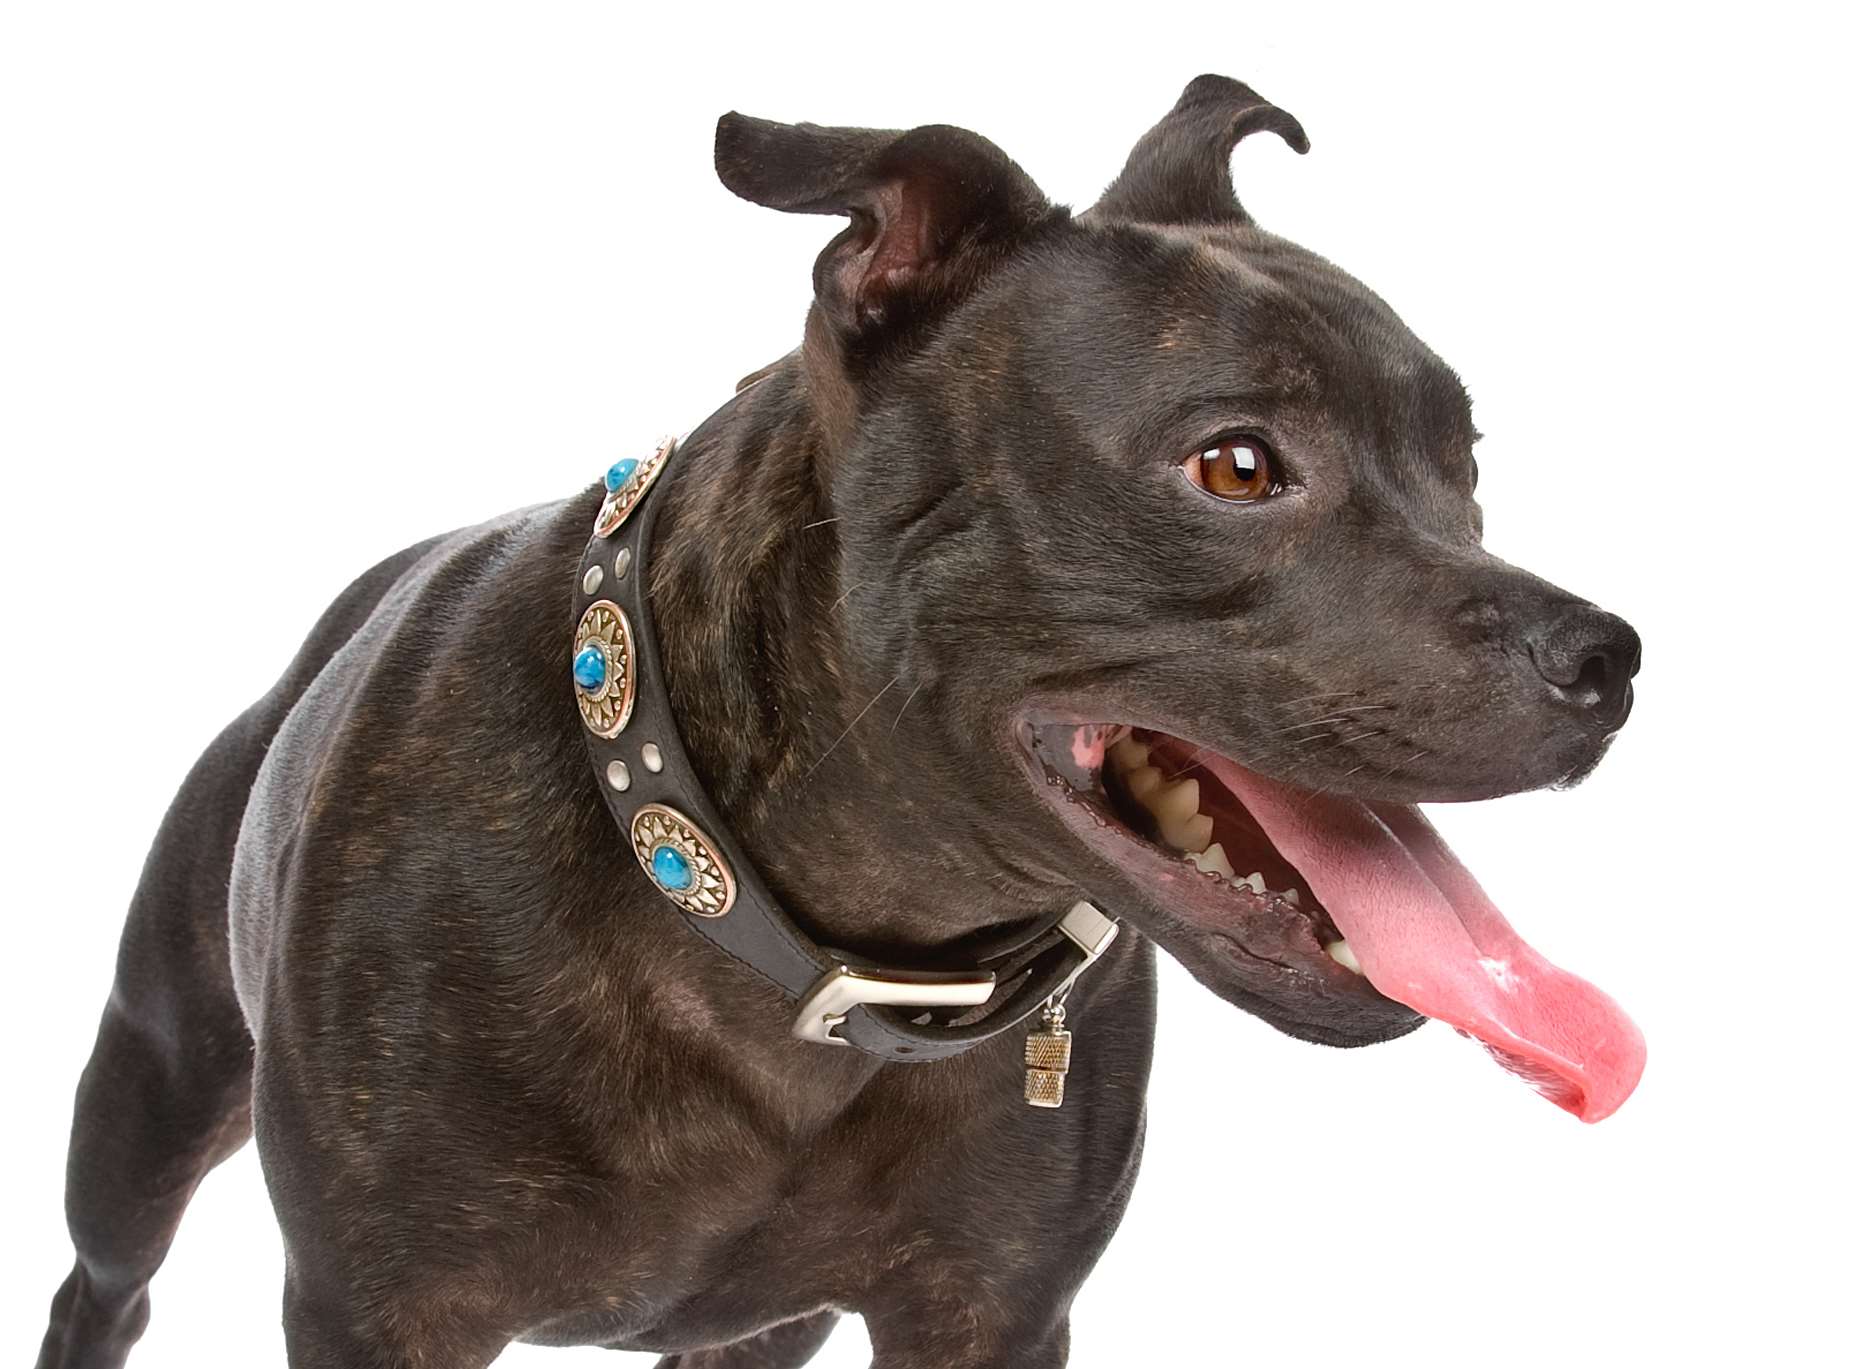 The dog was a Staffordshire cross similar to this one. Stock image.